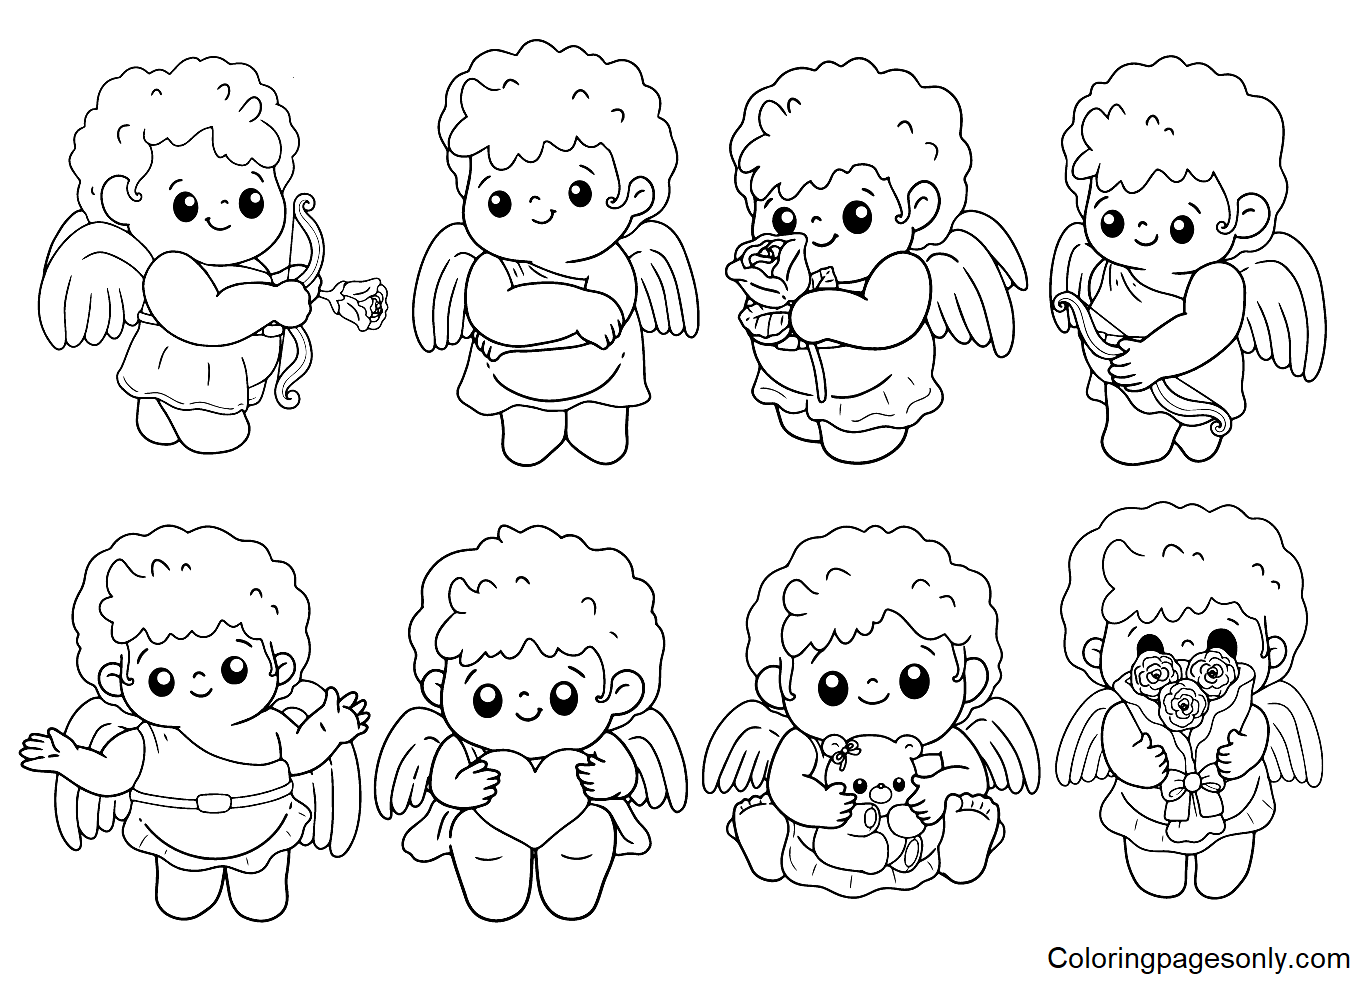 Cupid Sticker Coloring Pages